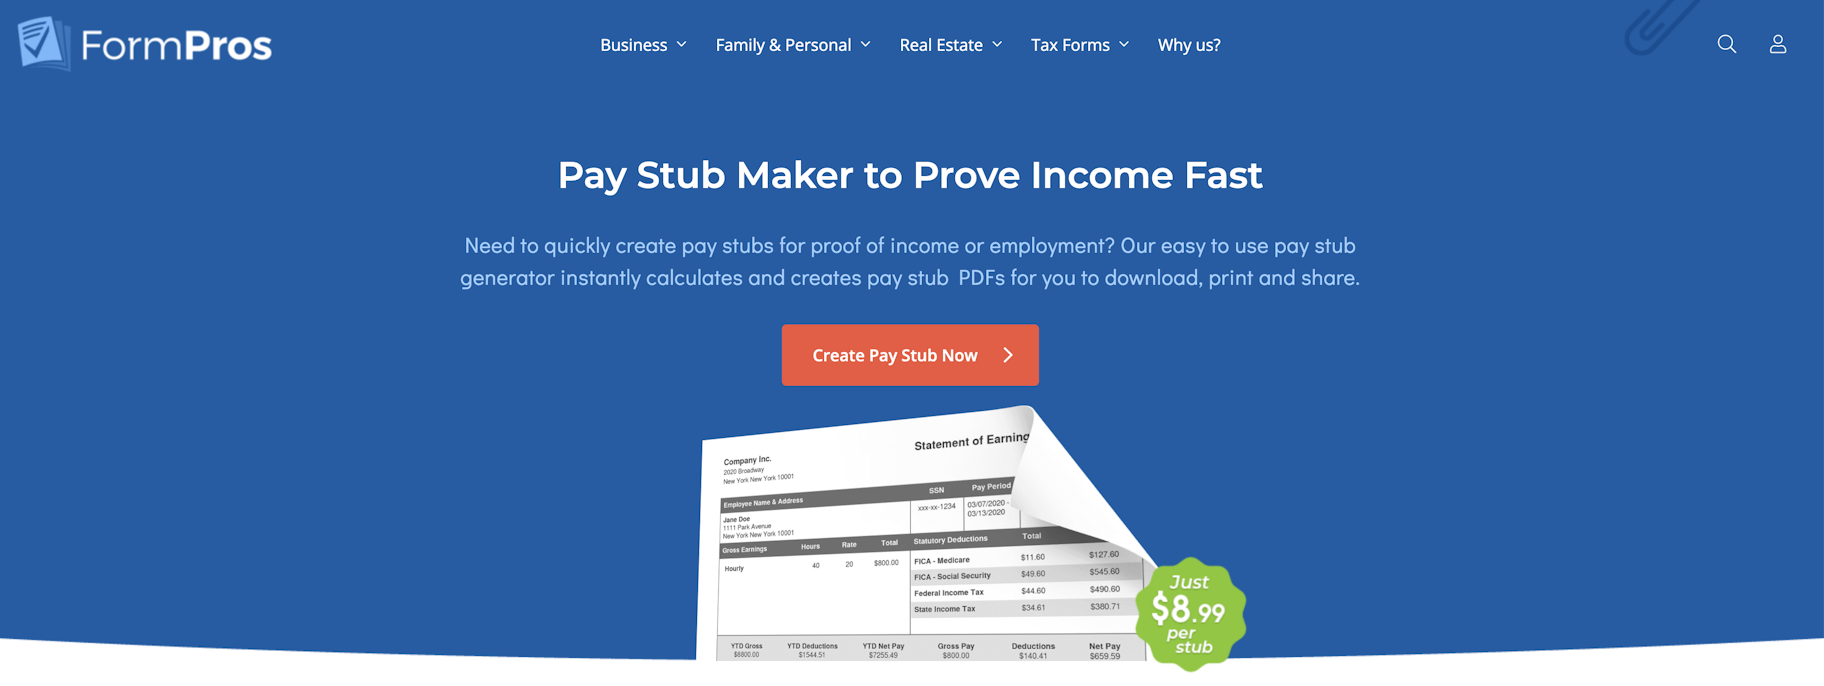 Online Pay Stub Generator: 7 Best Options For Your Business